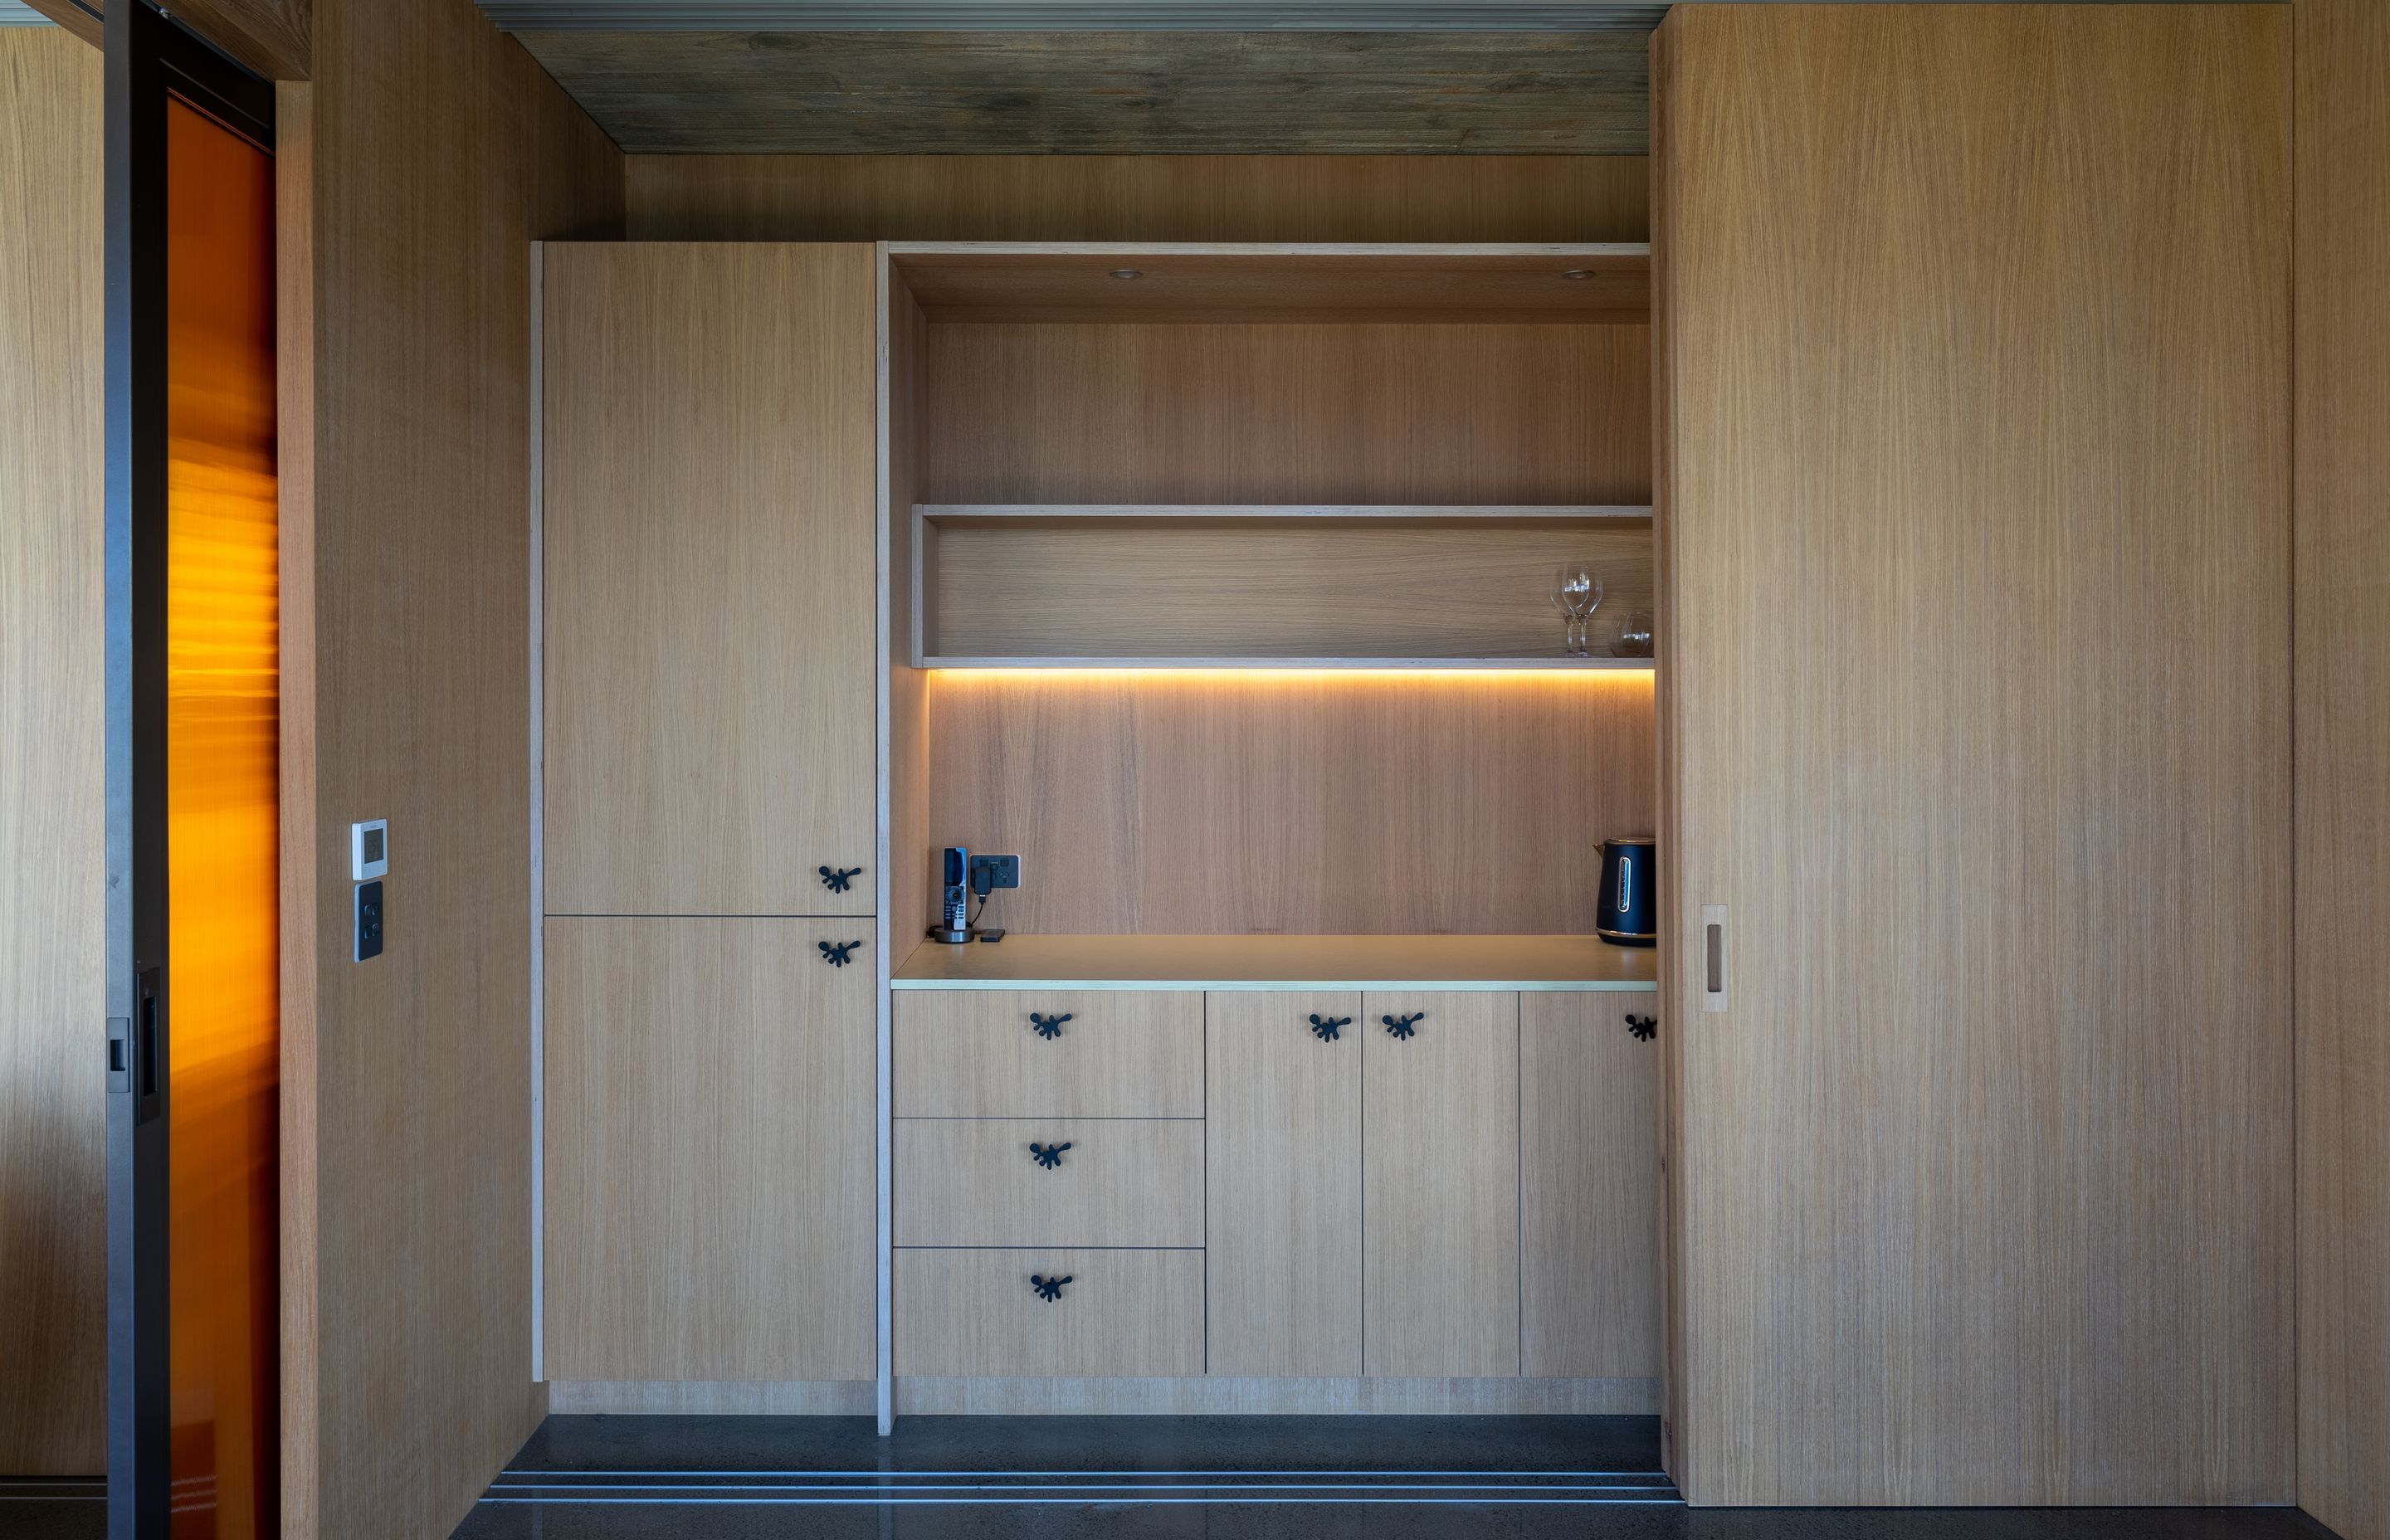 A kitchenette and storage have been incorporated into the downstairs multifunctional space.